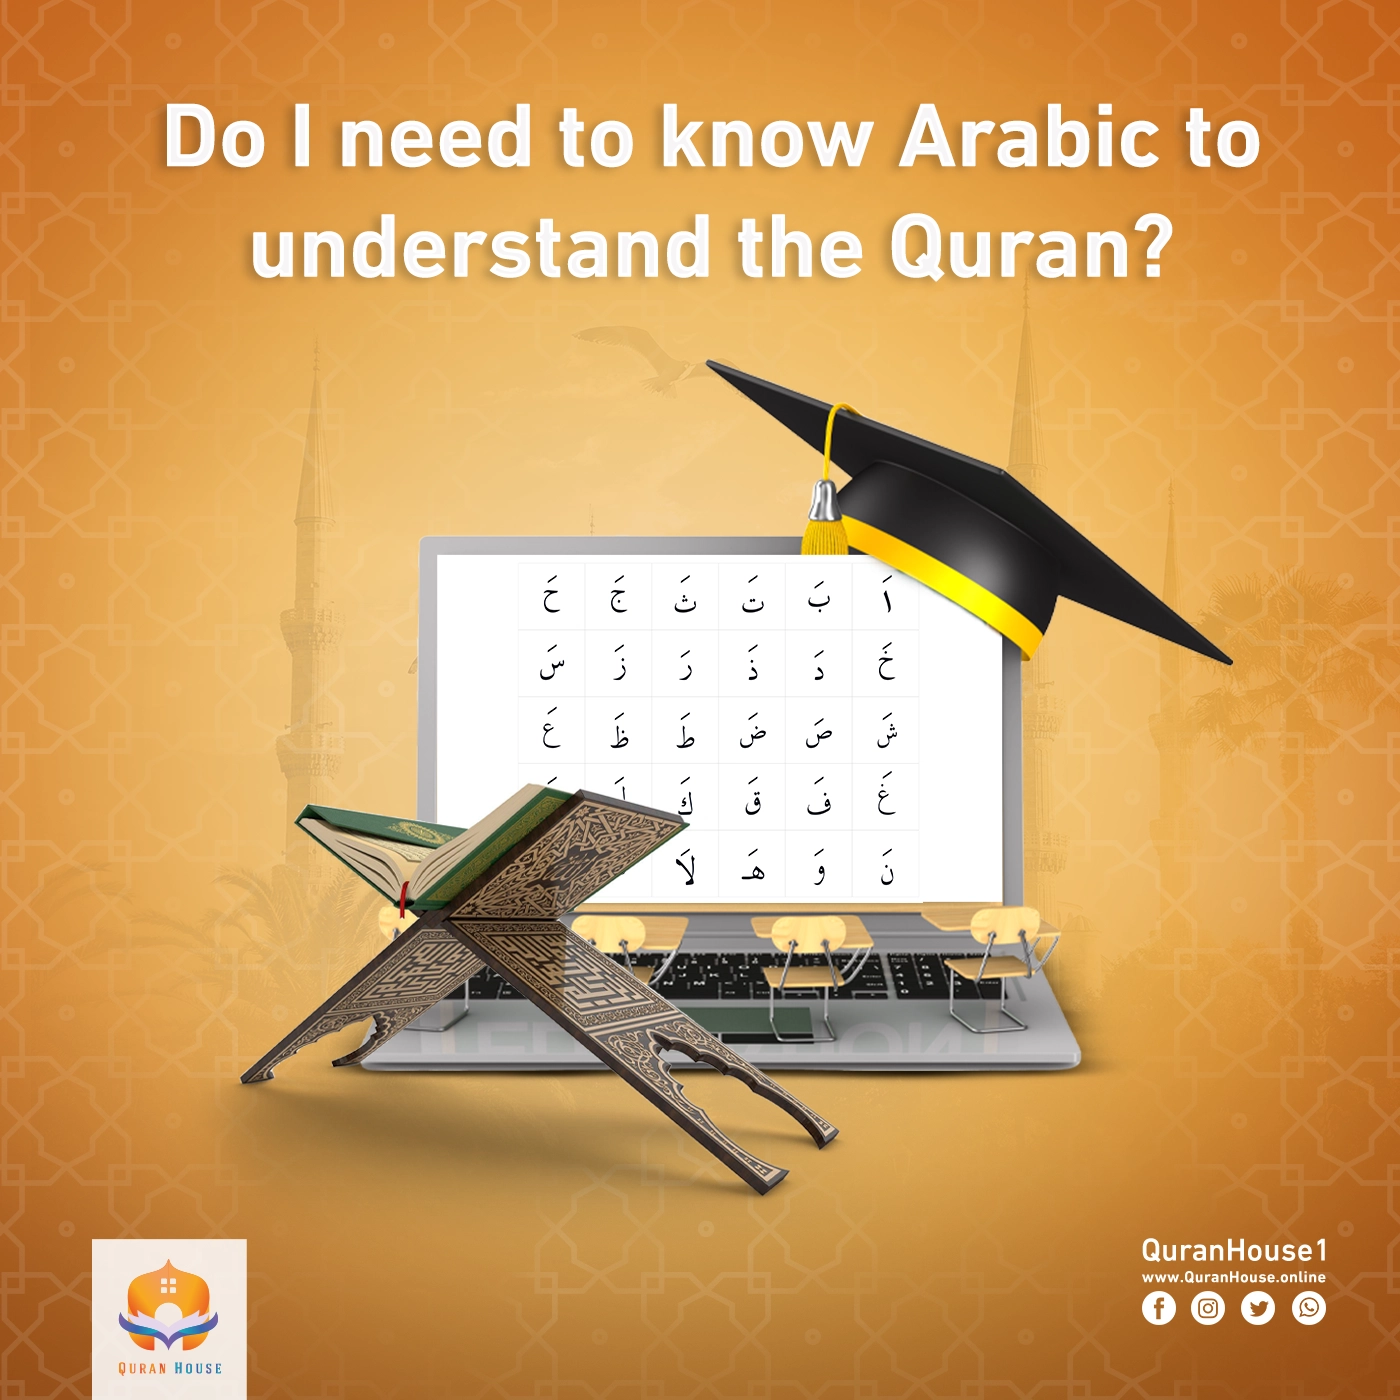 Do I need to know Arabic to understand the Quran?